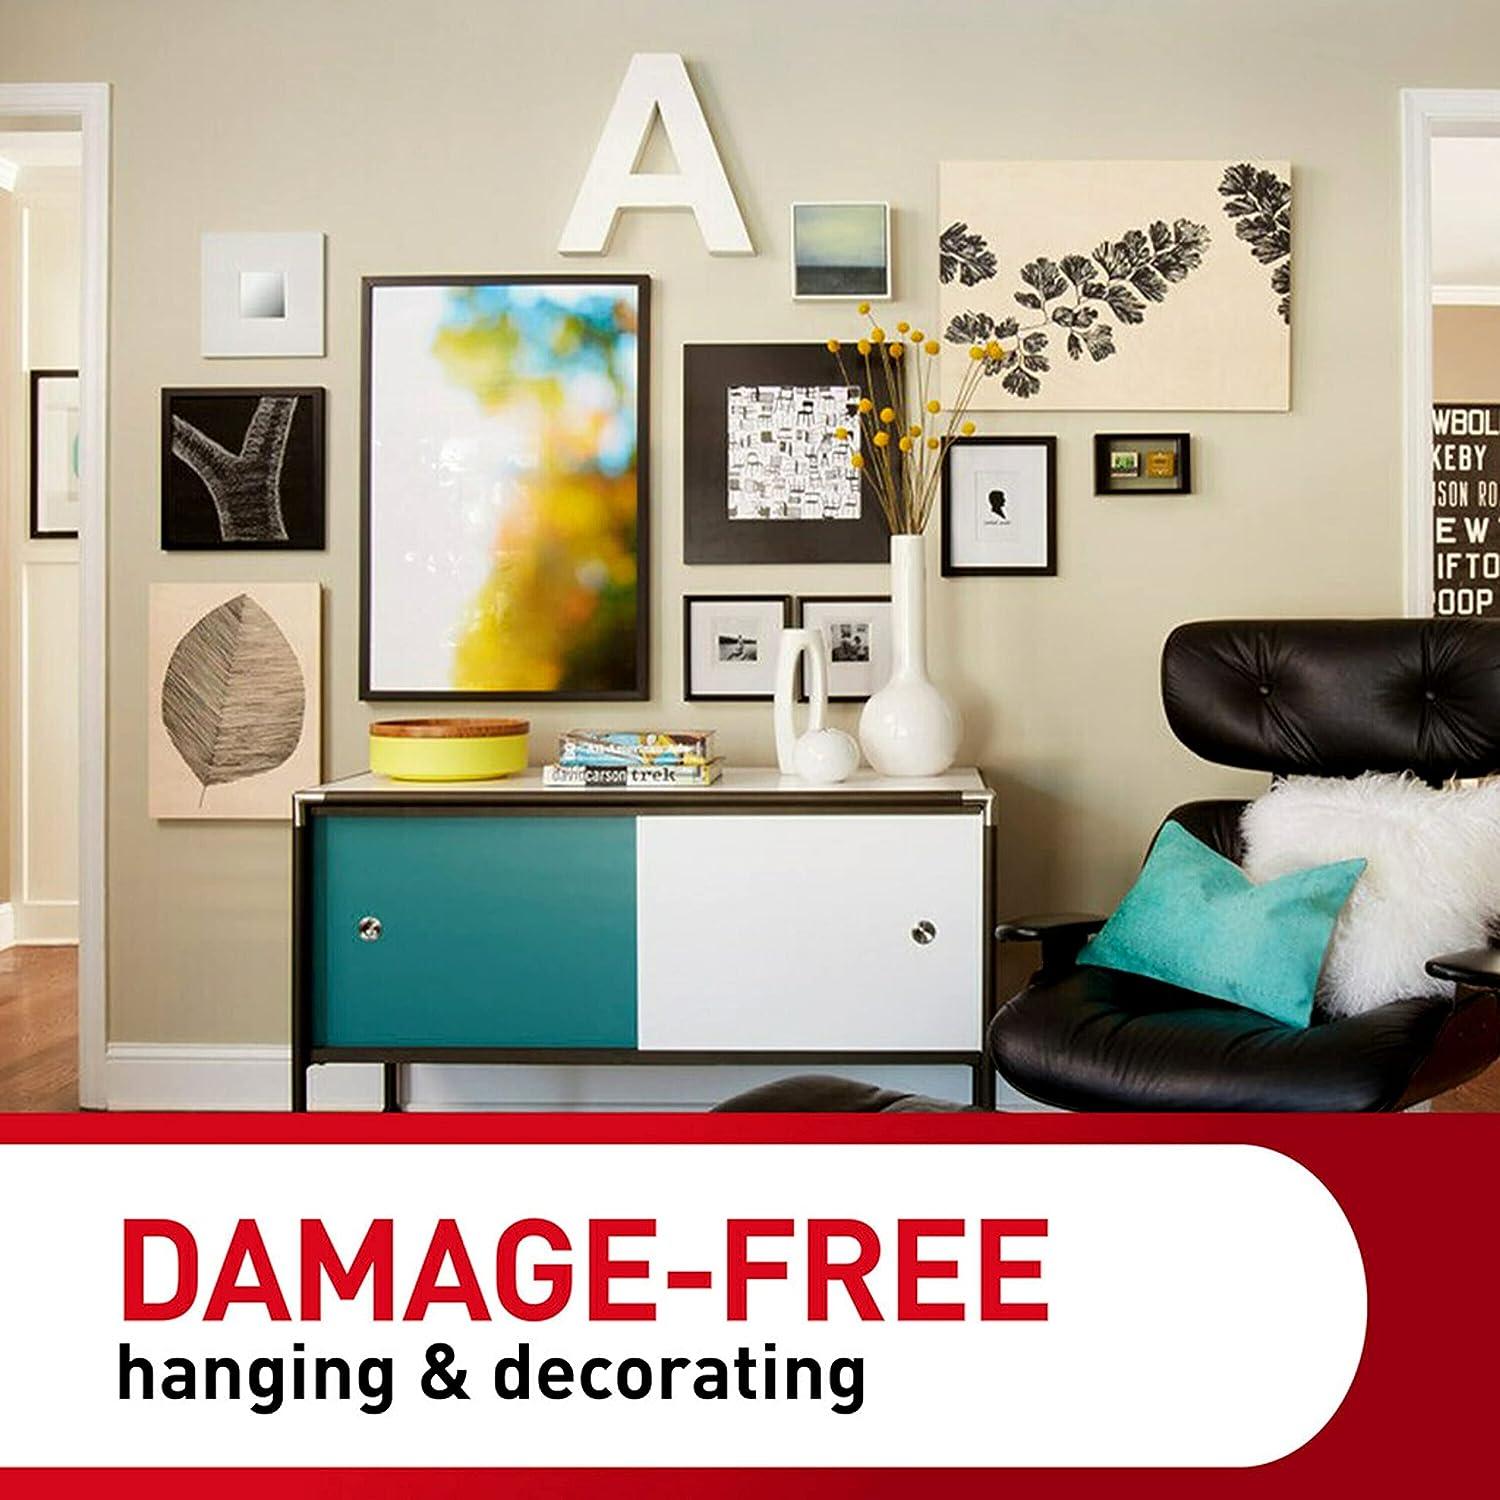 Command Large Picture Hanging Strips, Damage Free Hanging Picture